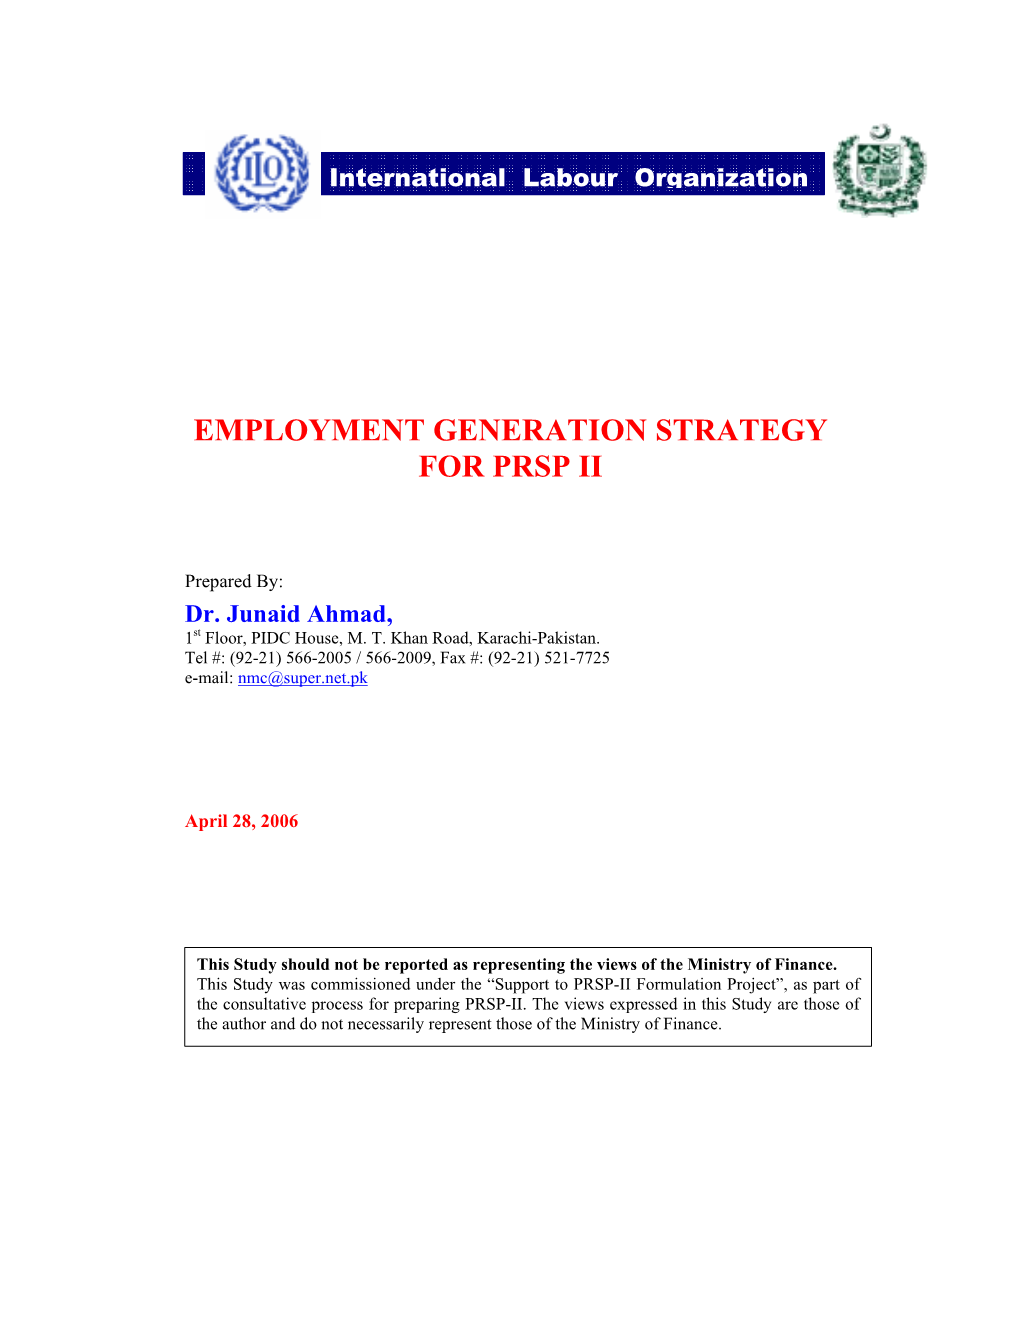 Employment Generation Strategy for Prsp Ii